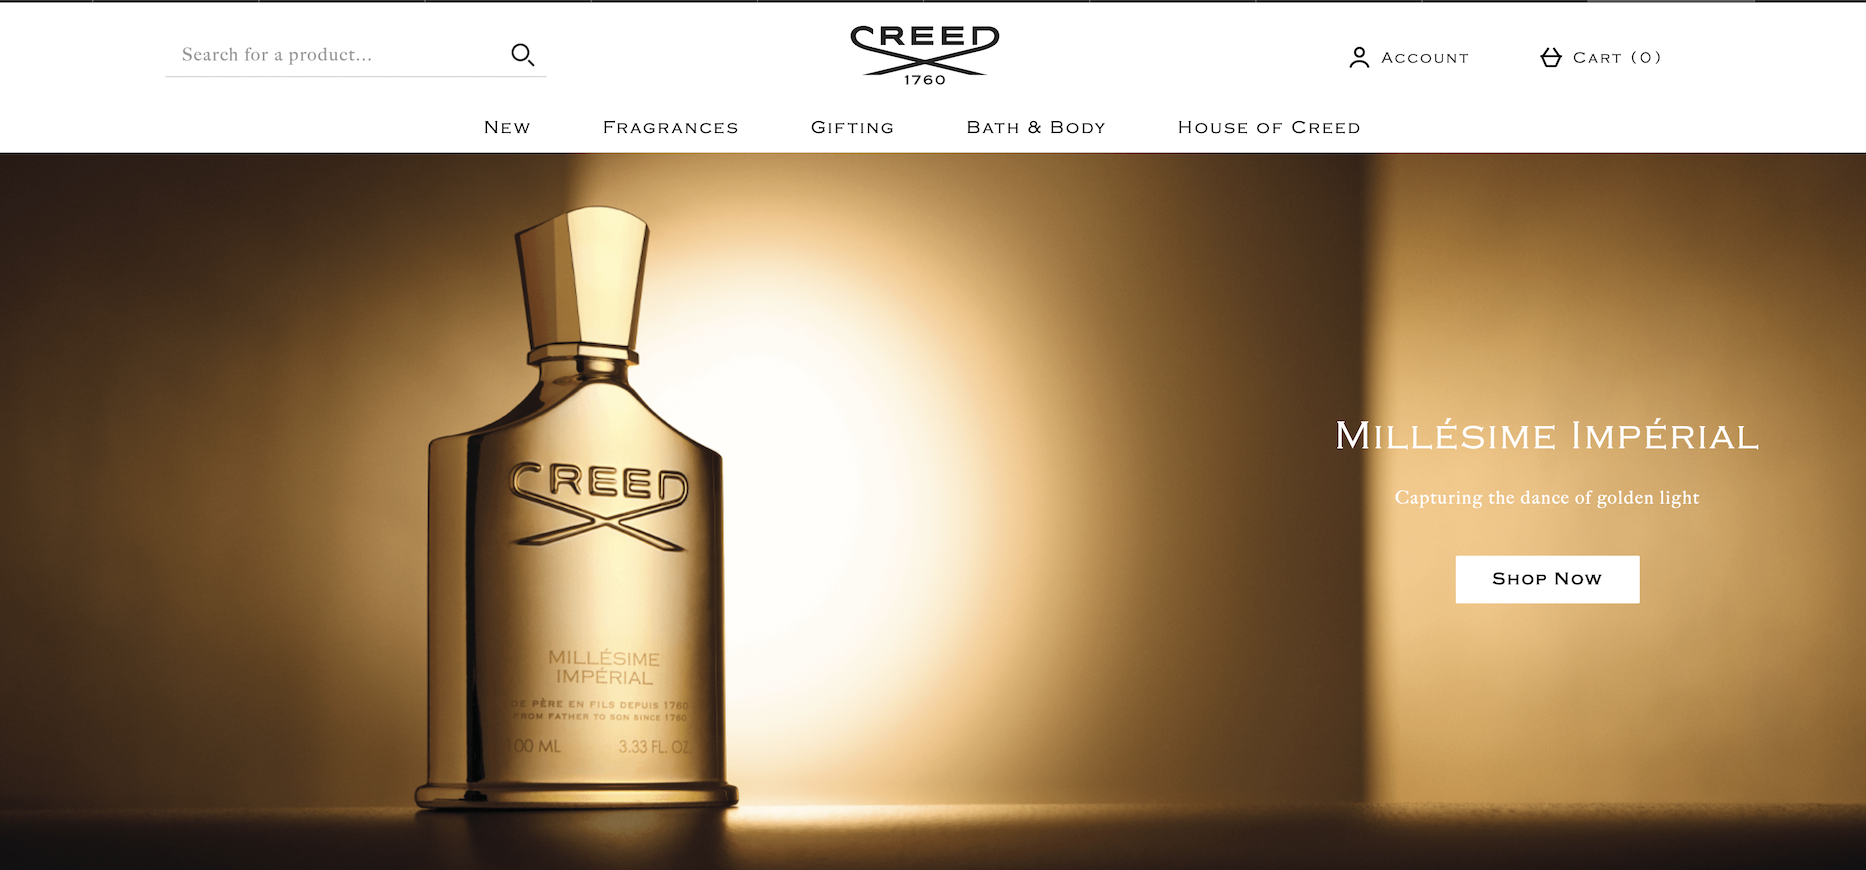 Kering Beauté Acquires High-end Perfume Brand Creed, Focuses on Chinese Market and Travel Retail in the Future